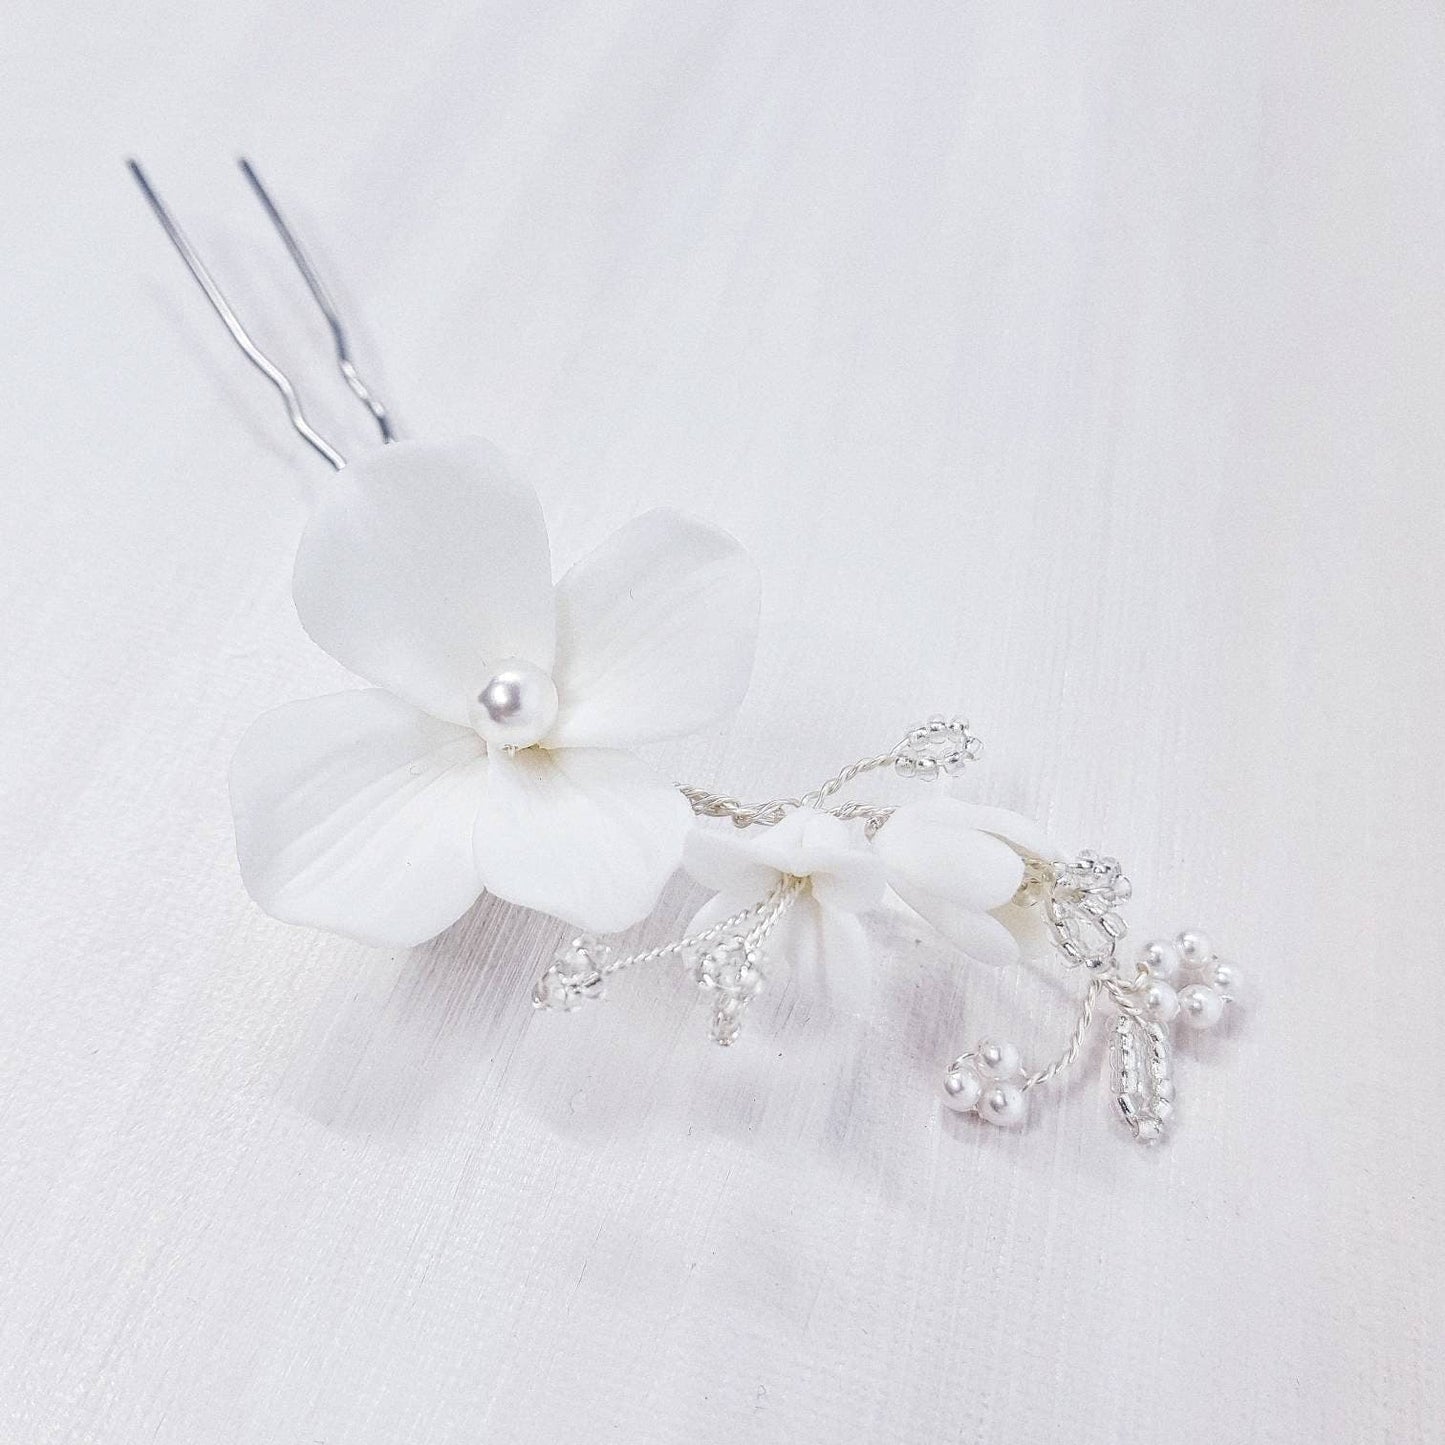 JOLIE Hair U Pin white porcelain flowers lily of the valley clay gold bride hairpins hair accessories flower floral handmade Australia